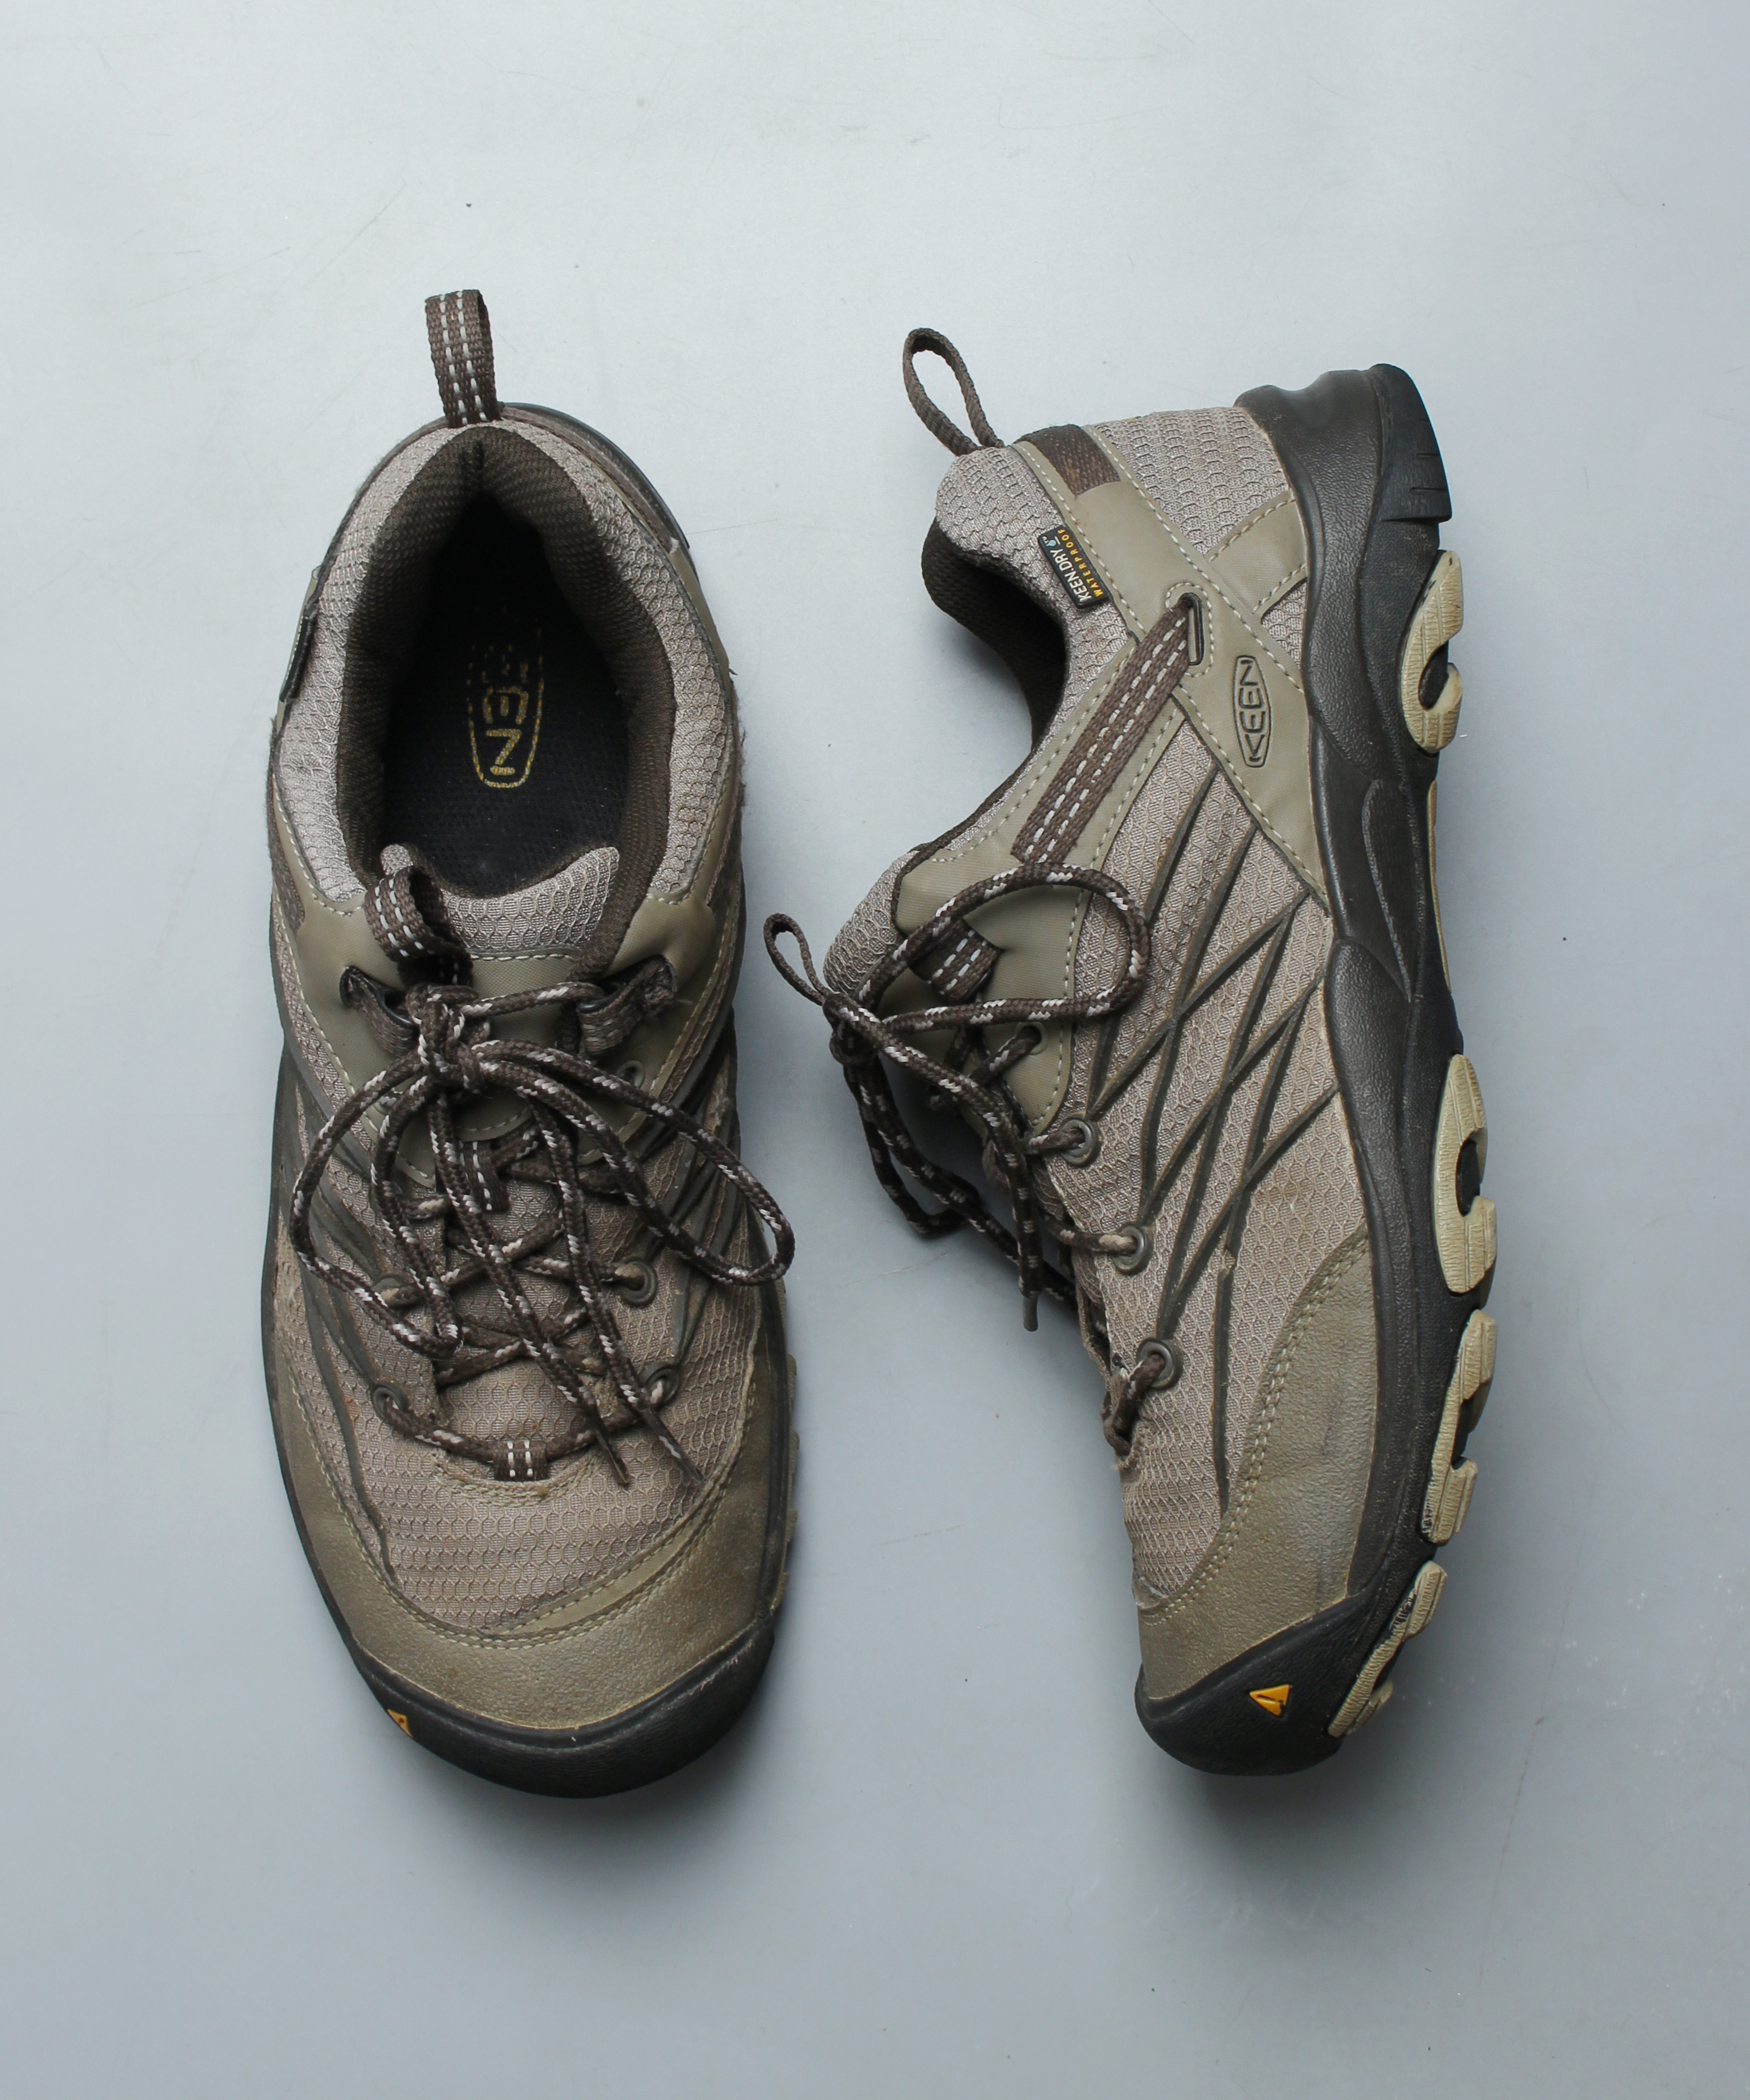 Keen marshall low WP hiking shoes